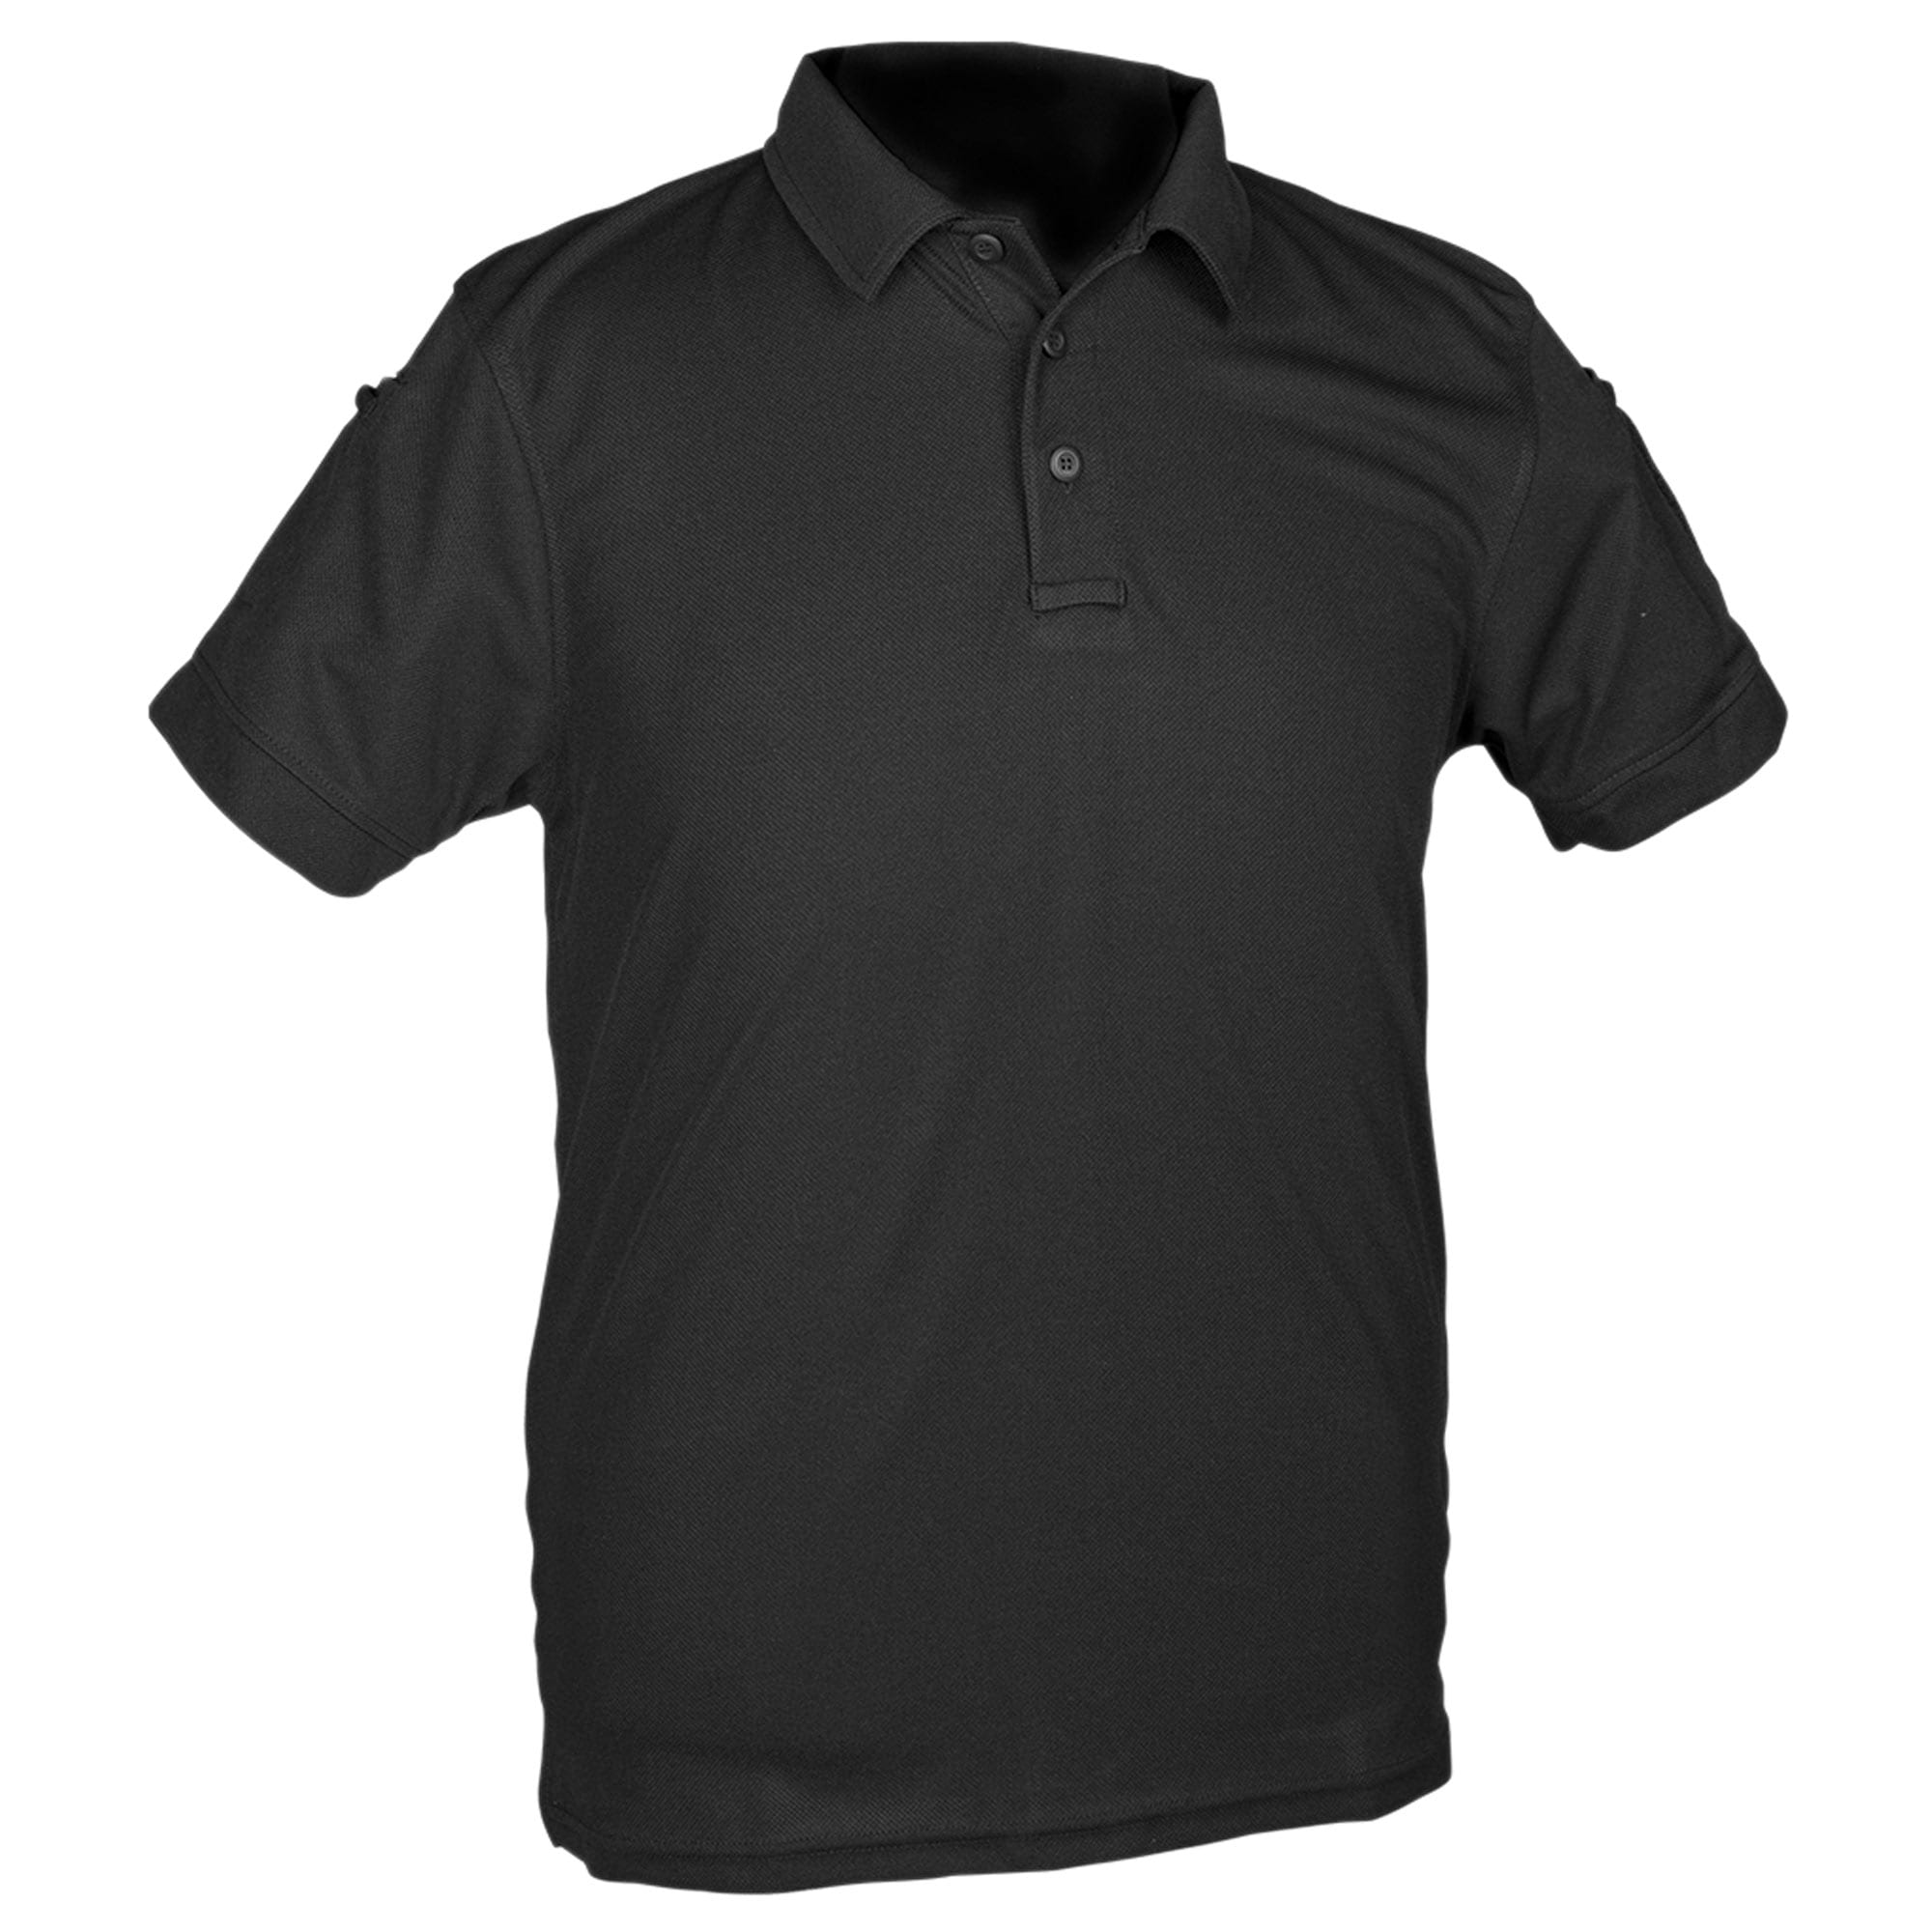 Purchase the Mil-Tec Polo Shirt Tactical Quickdry 1/2 Arm black